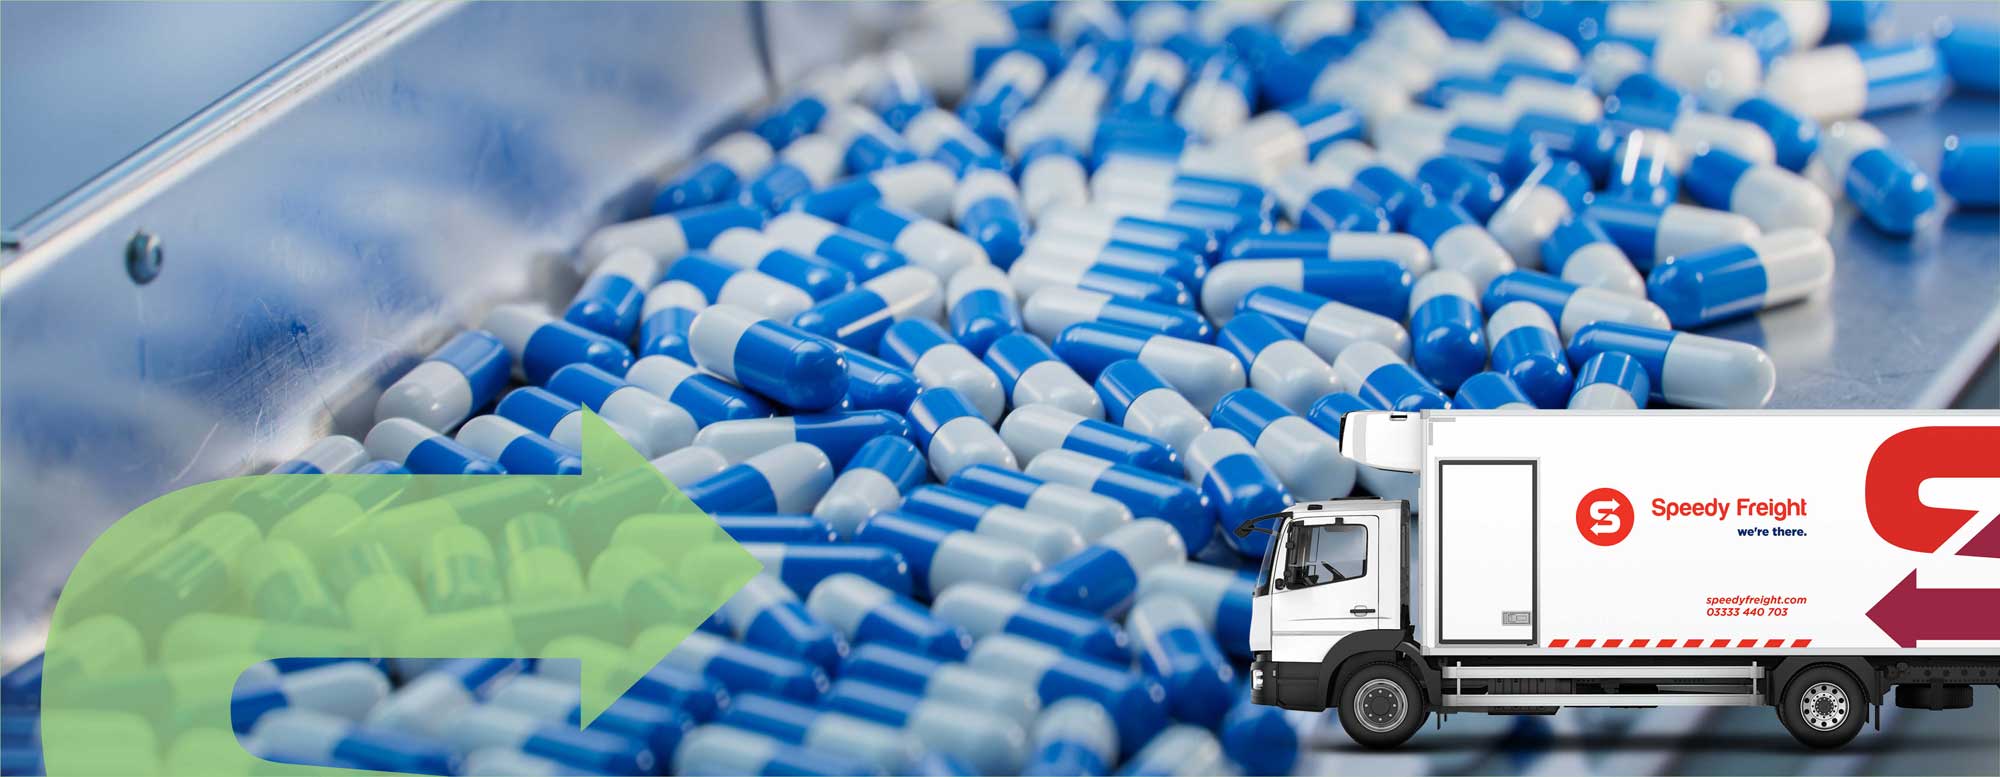 Transporting Life-Saving Medications: A Pharmaceutical Courier Case Study